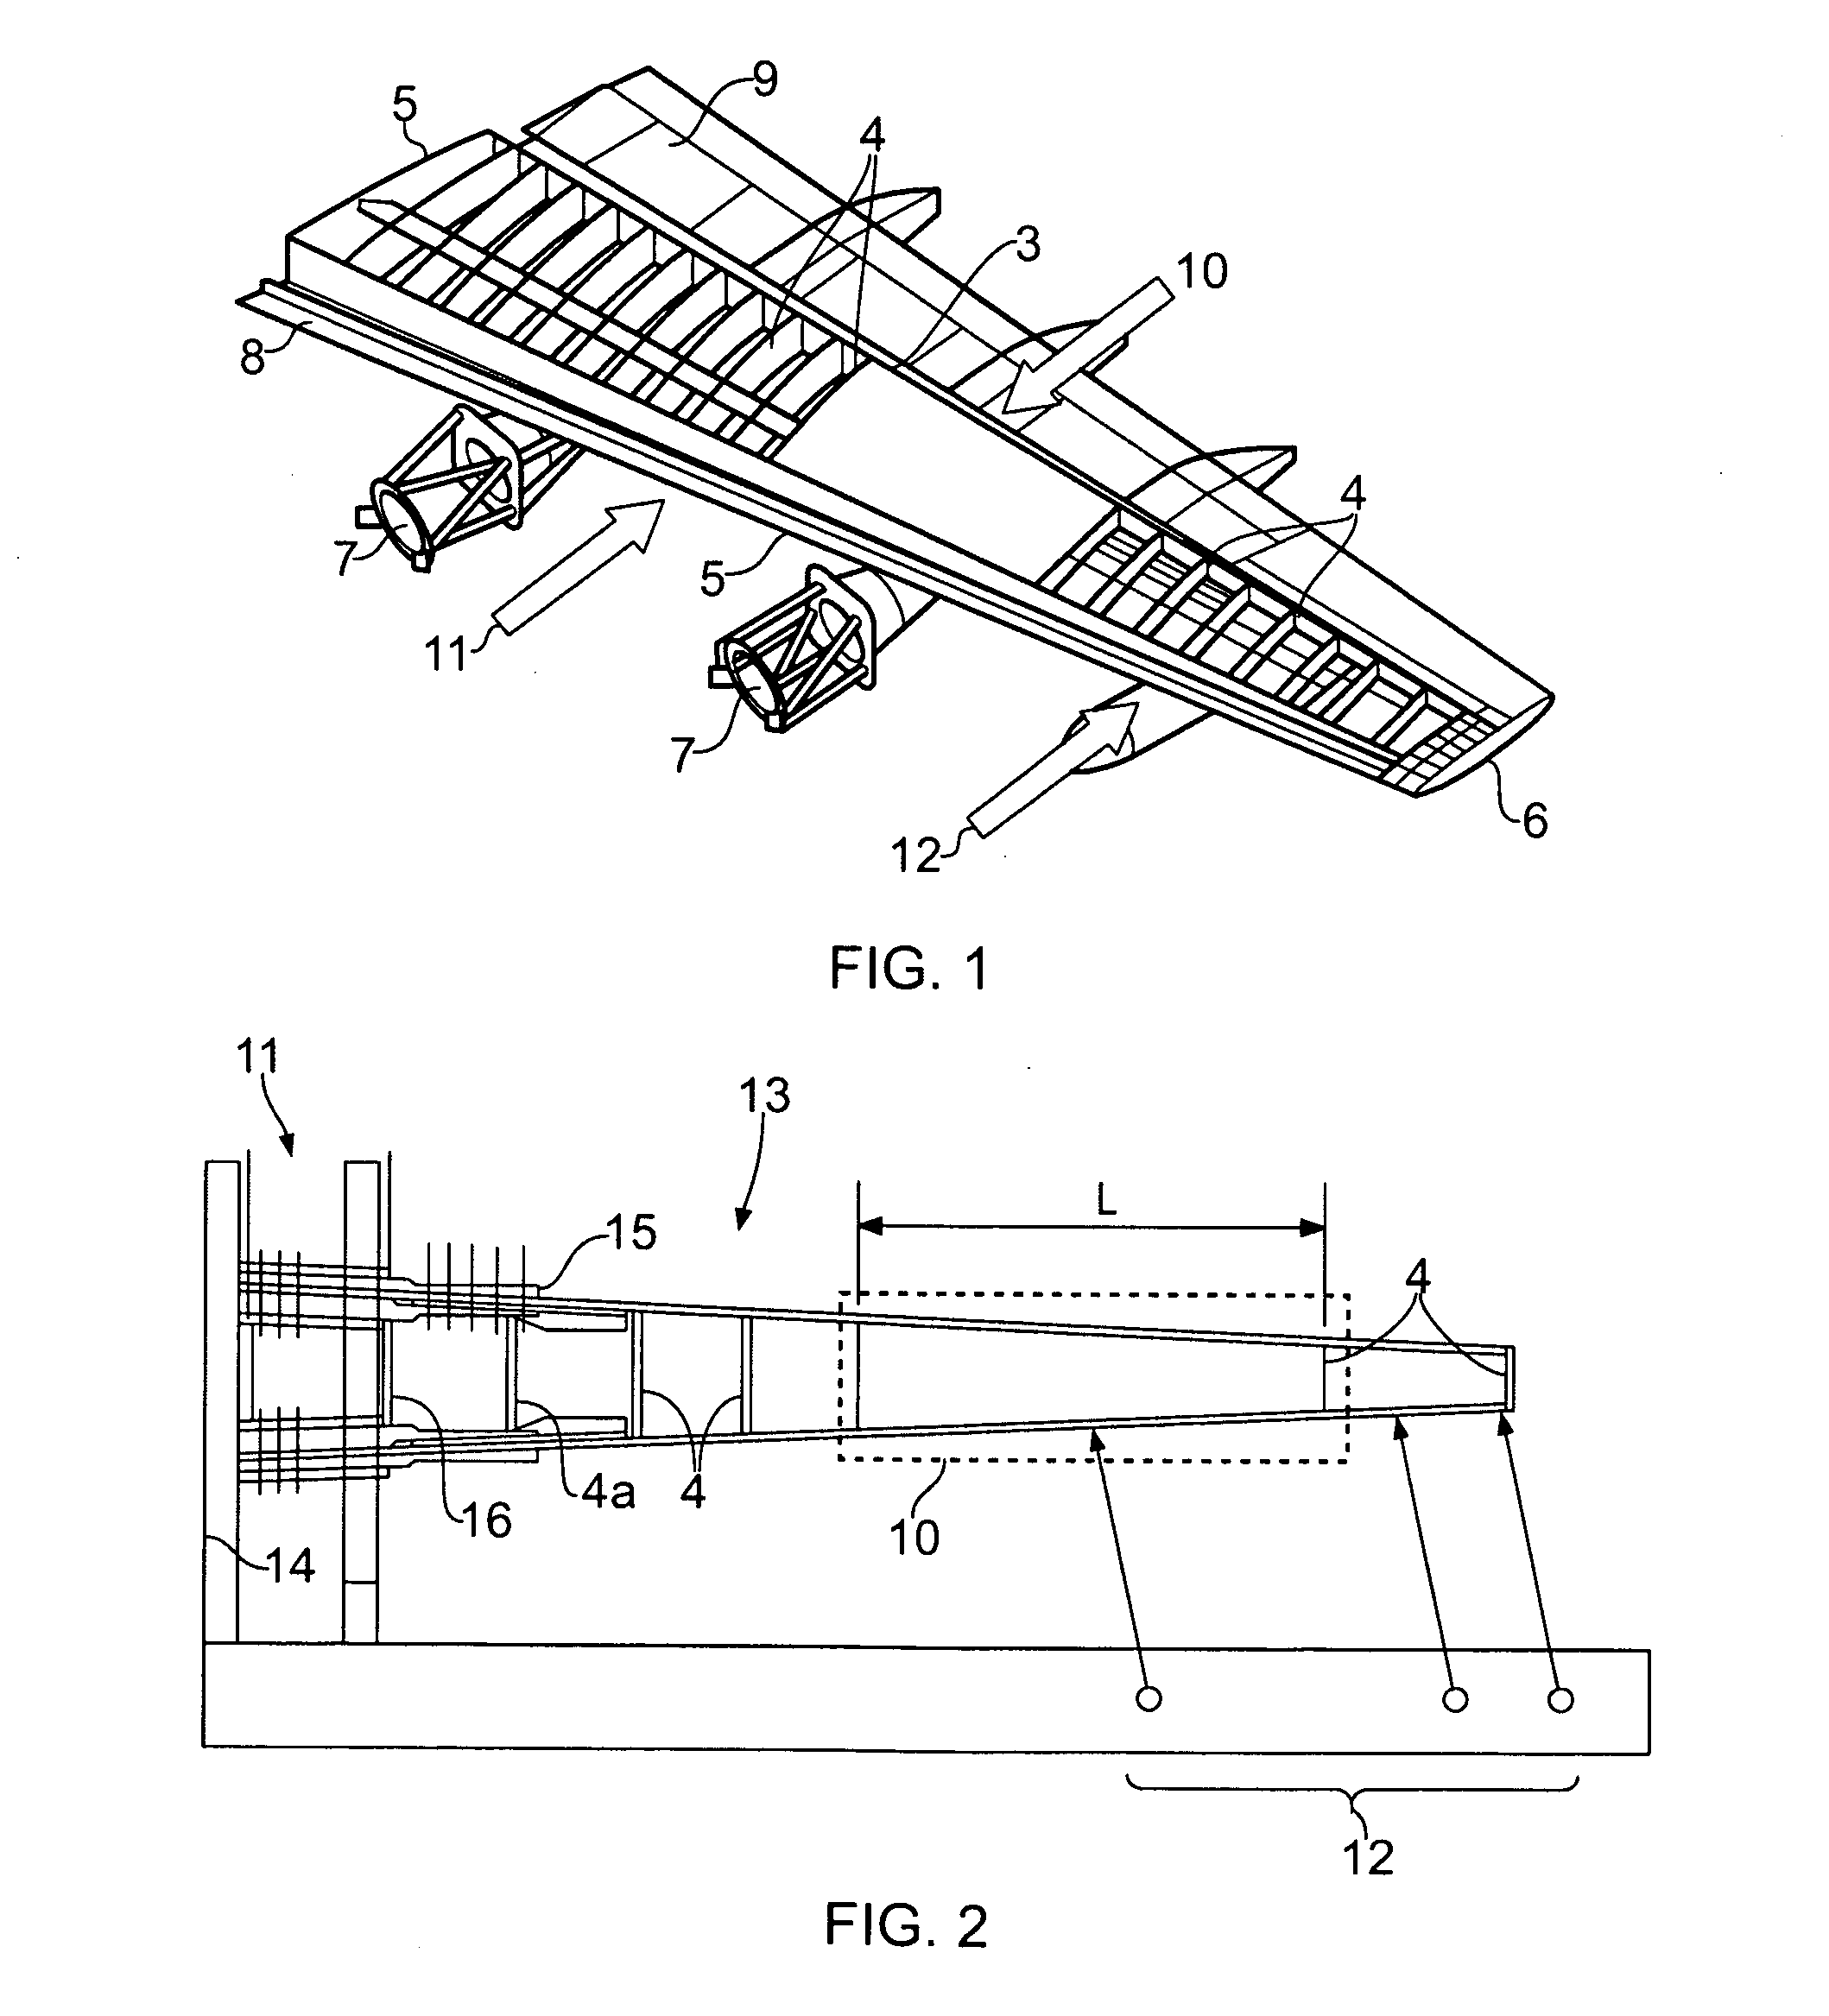 Thermal test apparatus and method